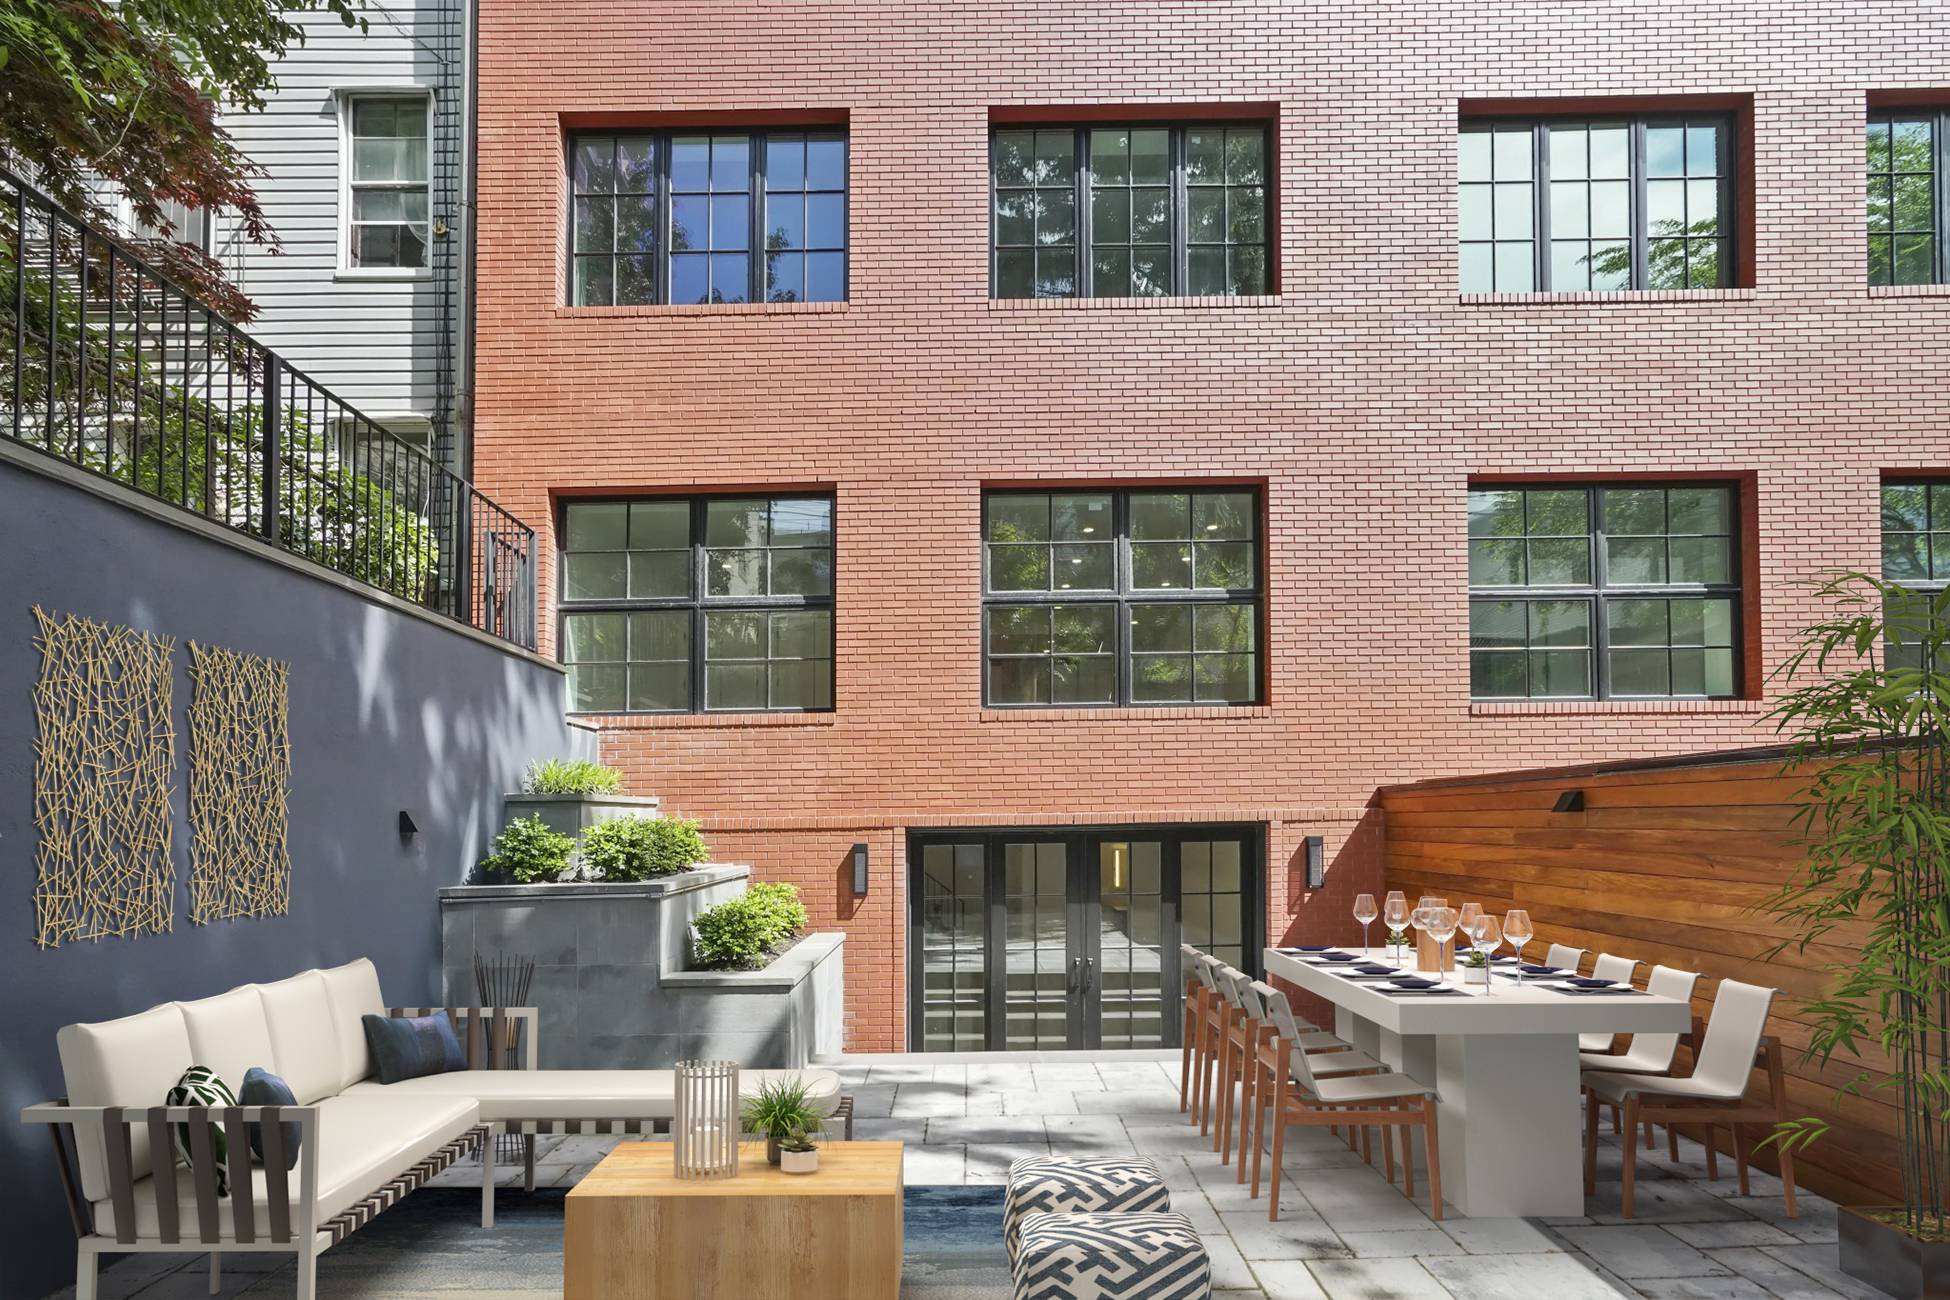 A stunning bold brick building, with the simplicity, privacy and rarefied authenticity found in a smaller boutique condo building is not for everyone just eight lucky owners.